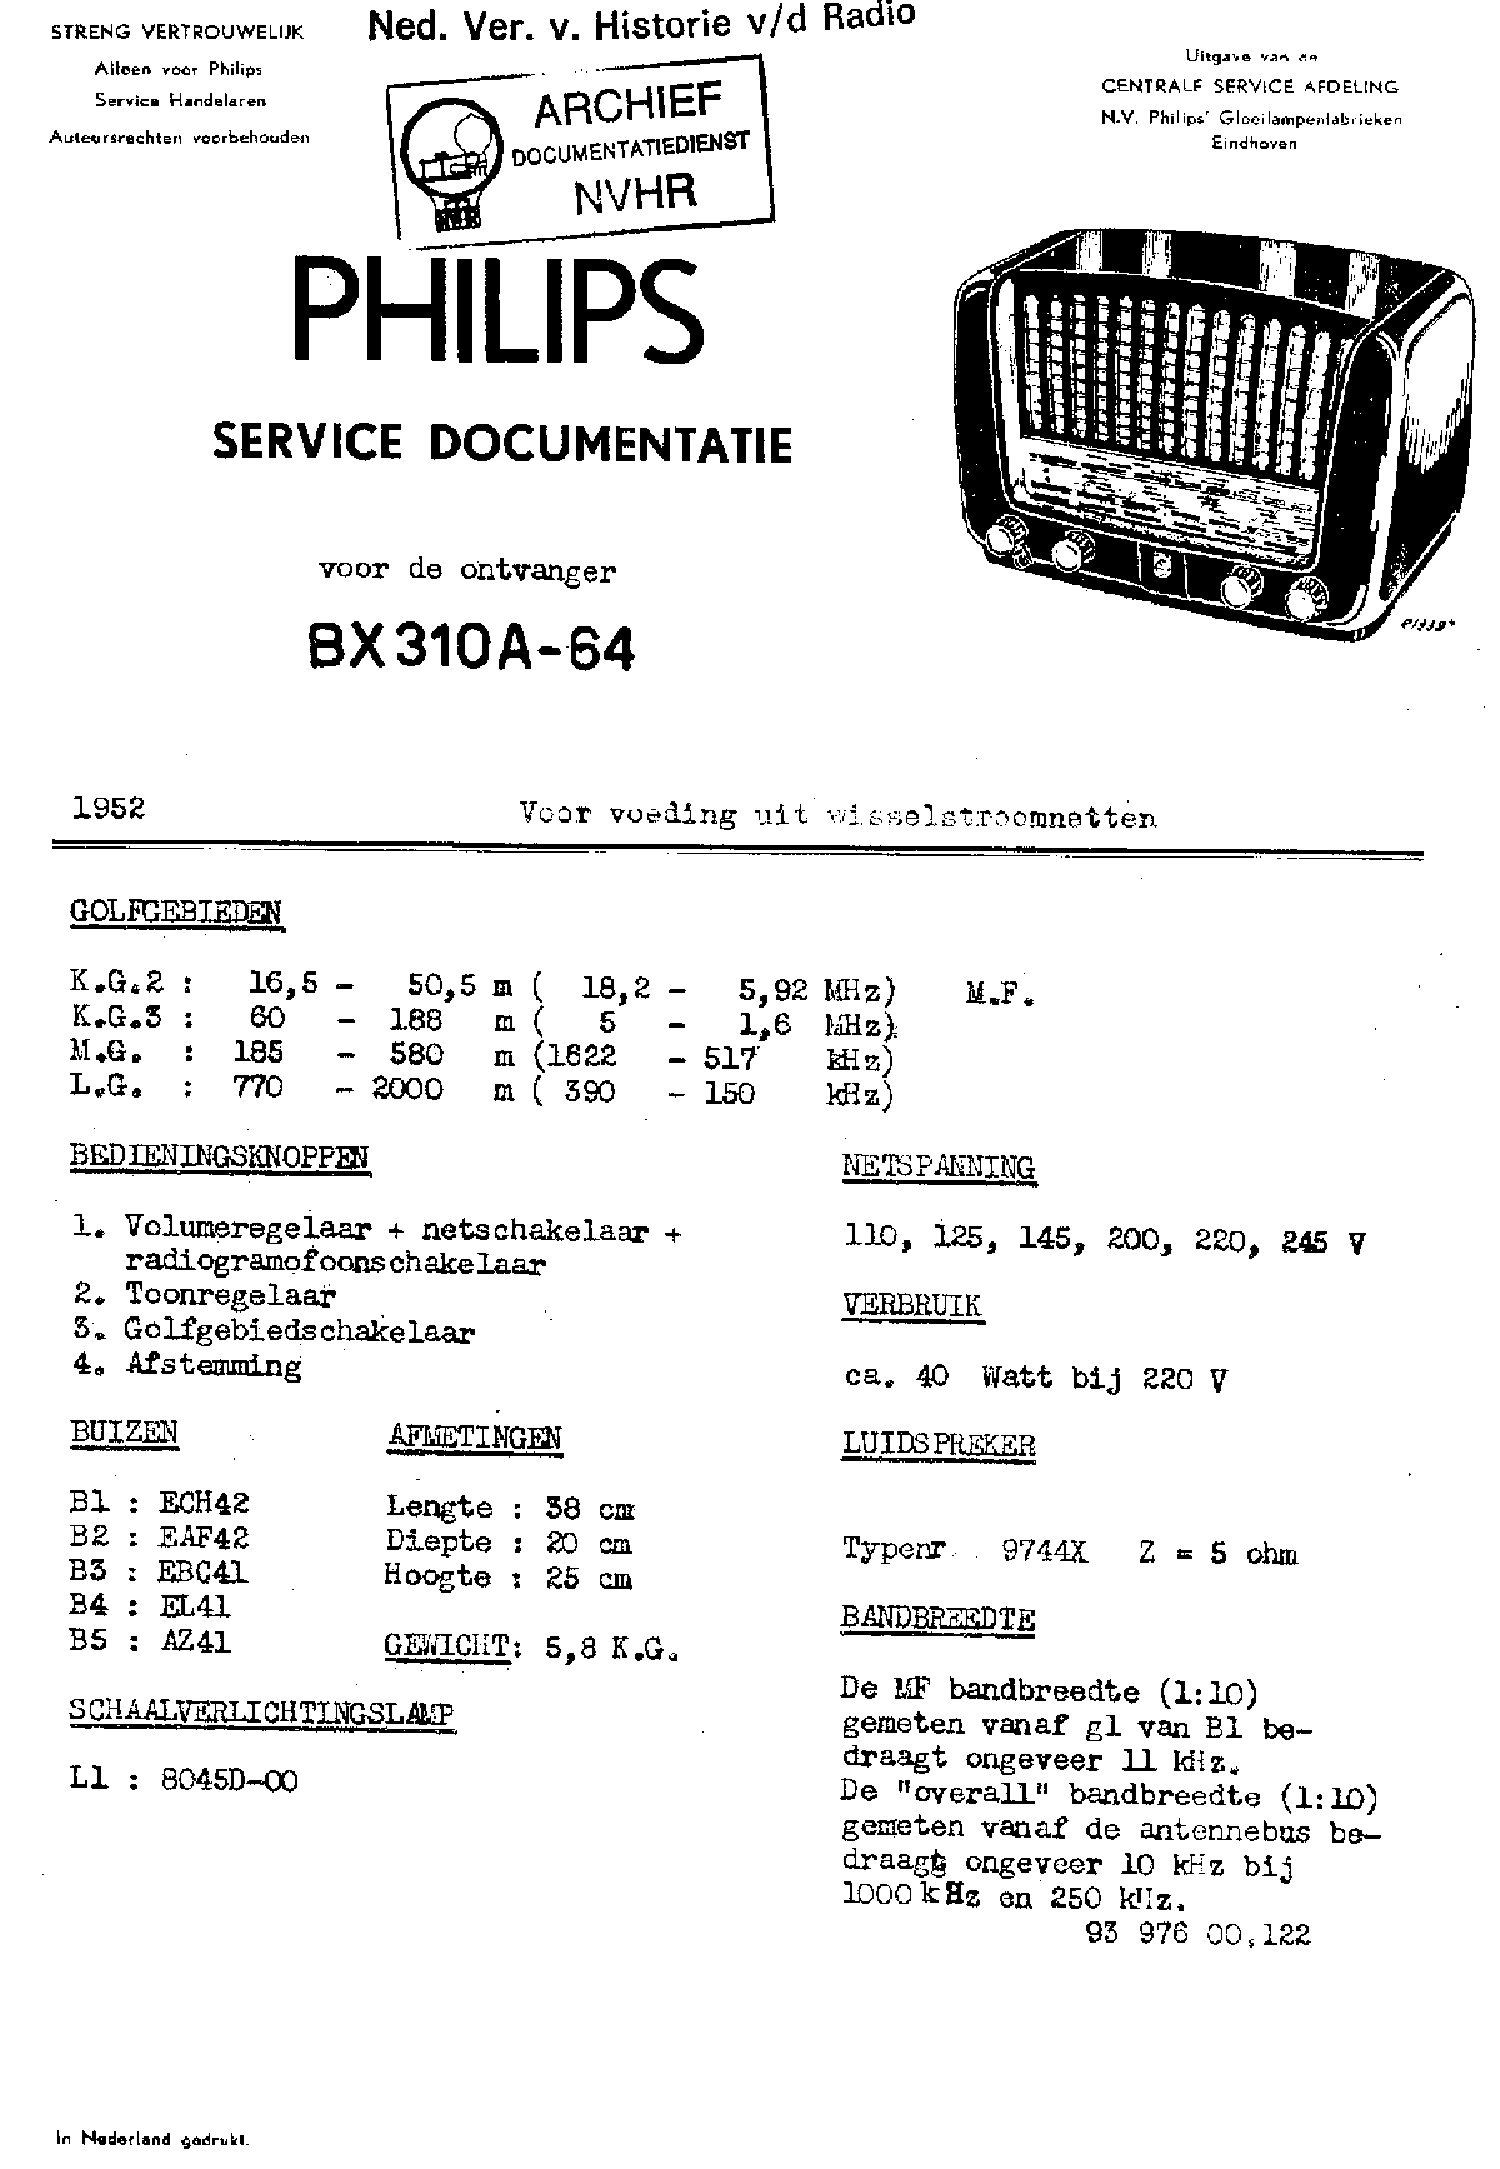 PHILIPS BX310A-64 AC RECEIVER 1952 SM service manual (1st page)